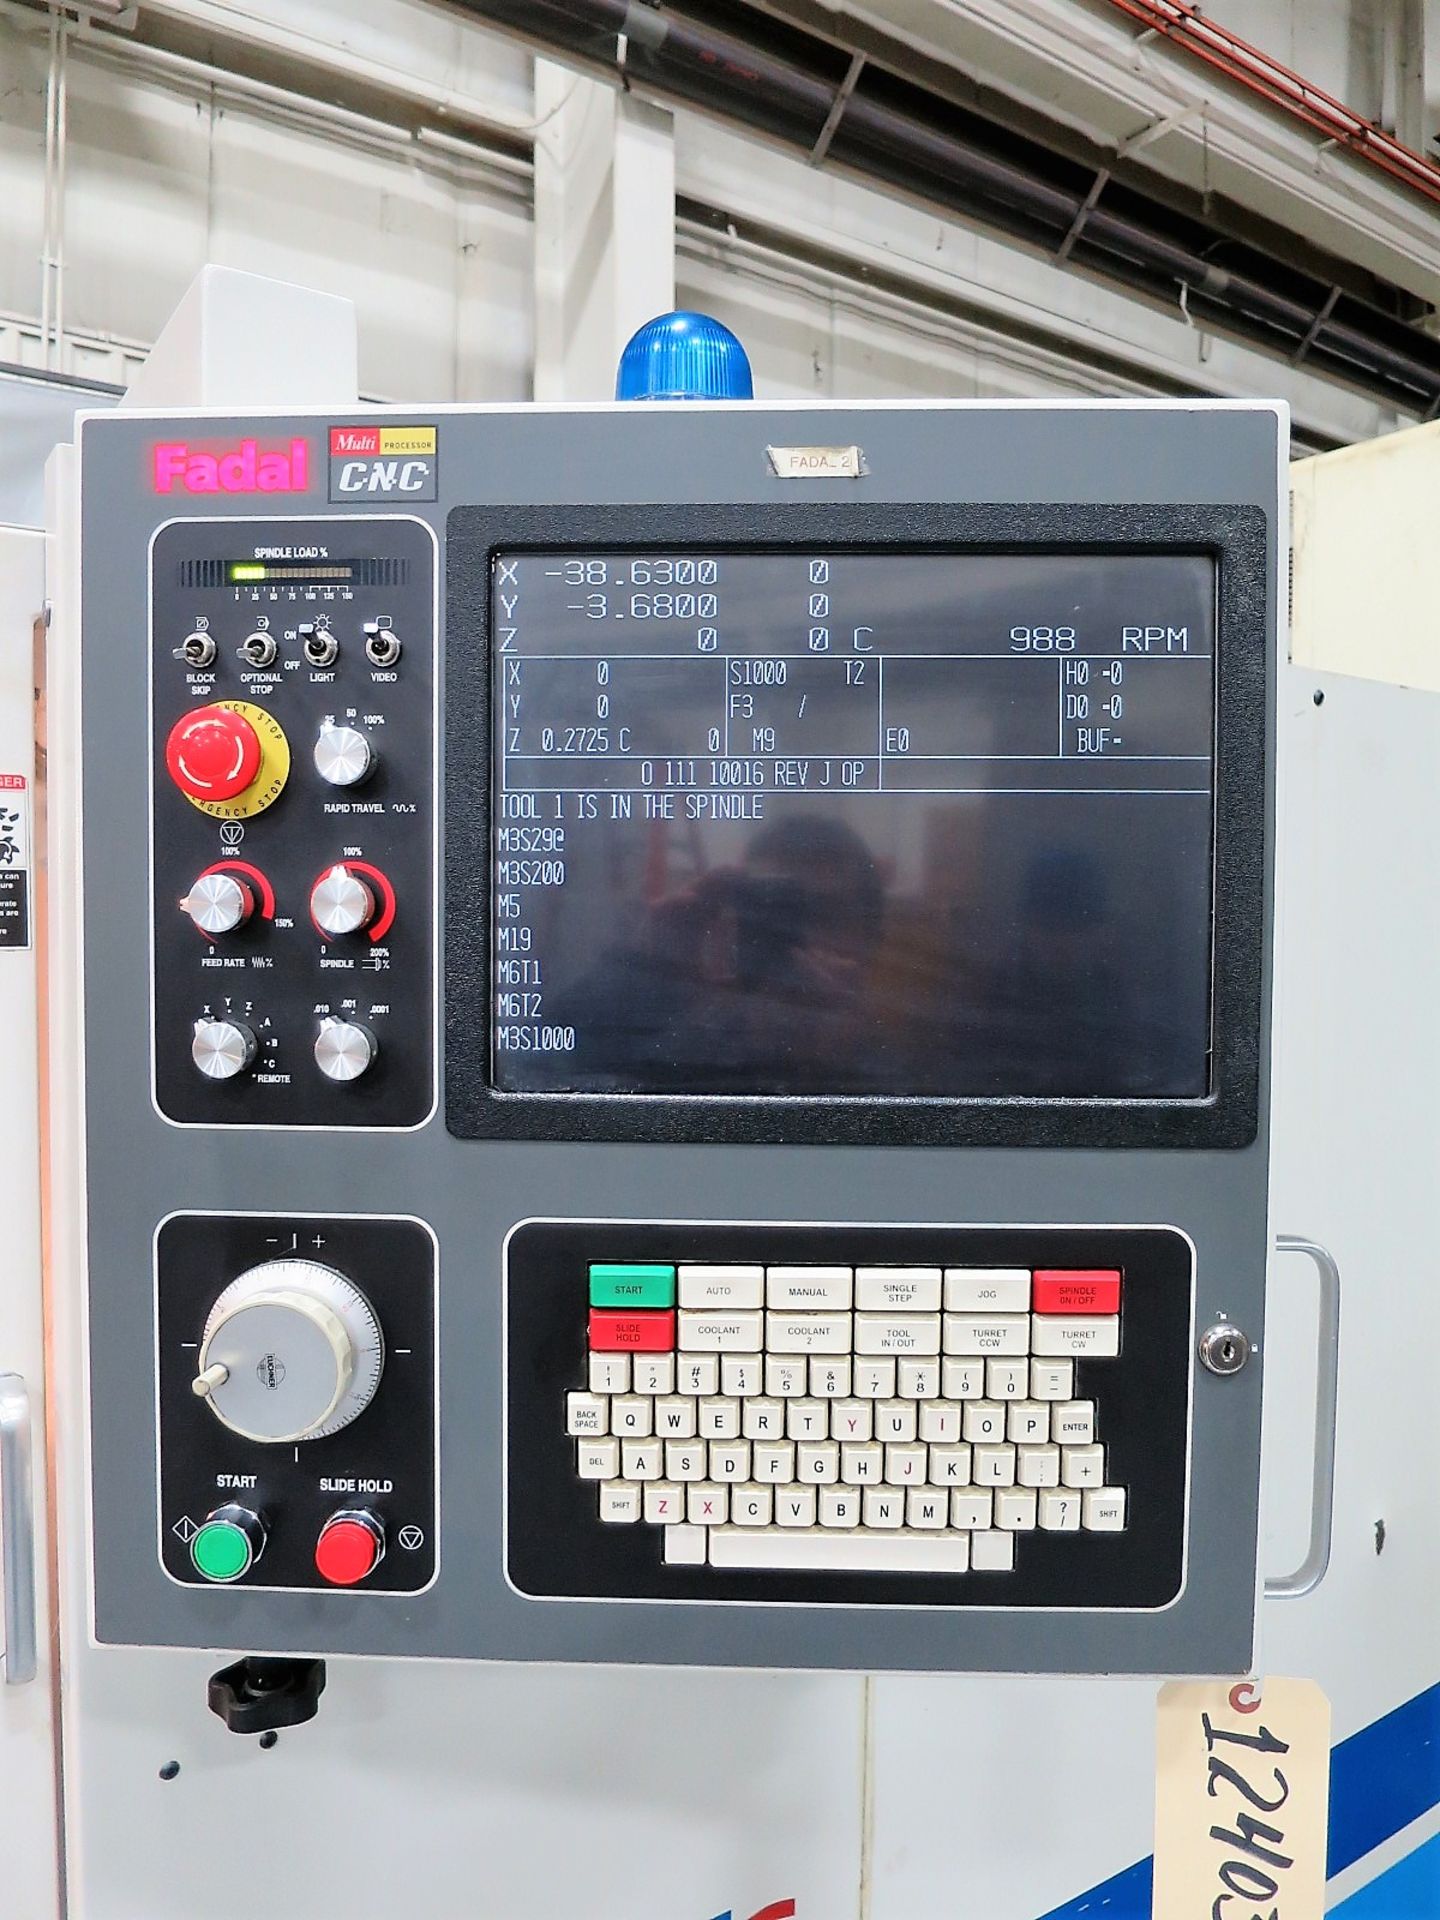 Fadal VMC 8030-HT CNC 3-Axis Vertical Machining Center, S/N 012004076614, New 2004 - Image 2 of 7